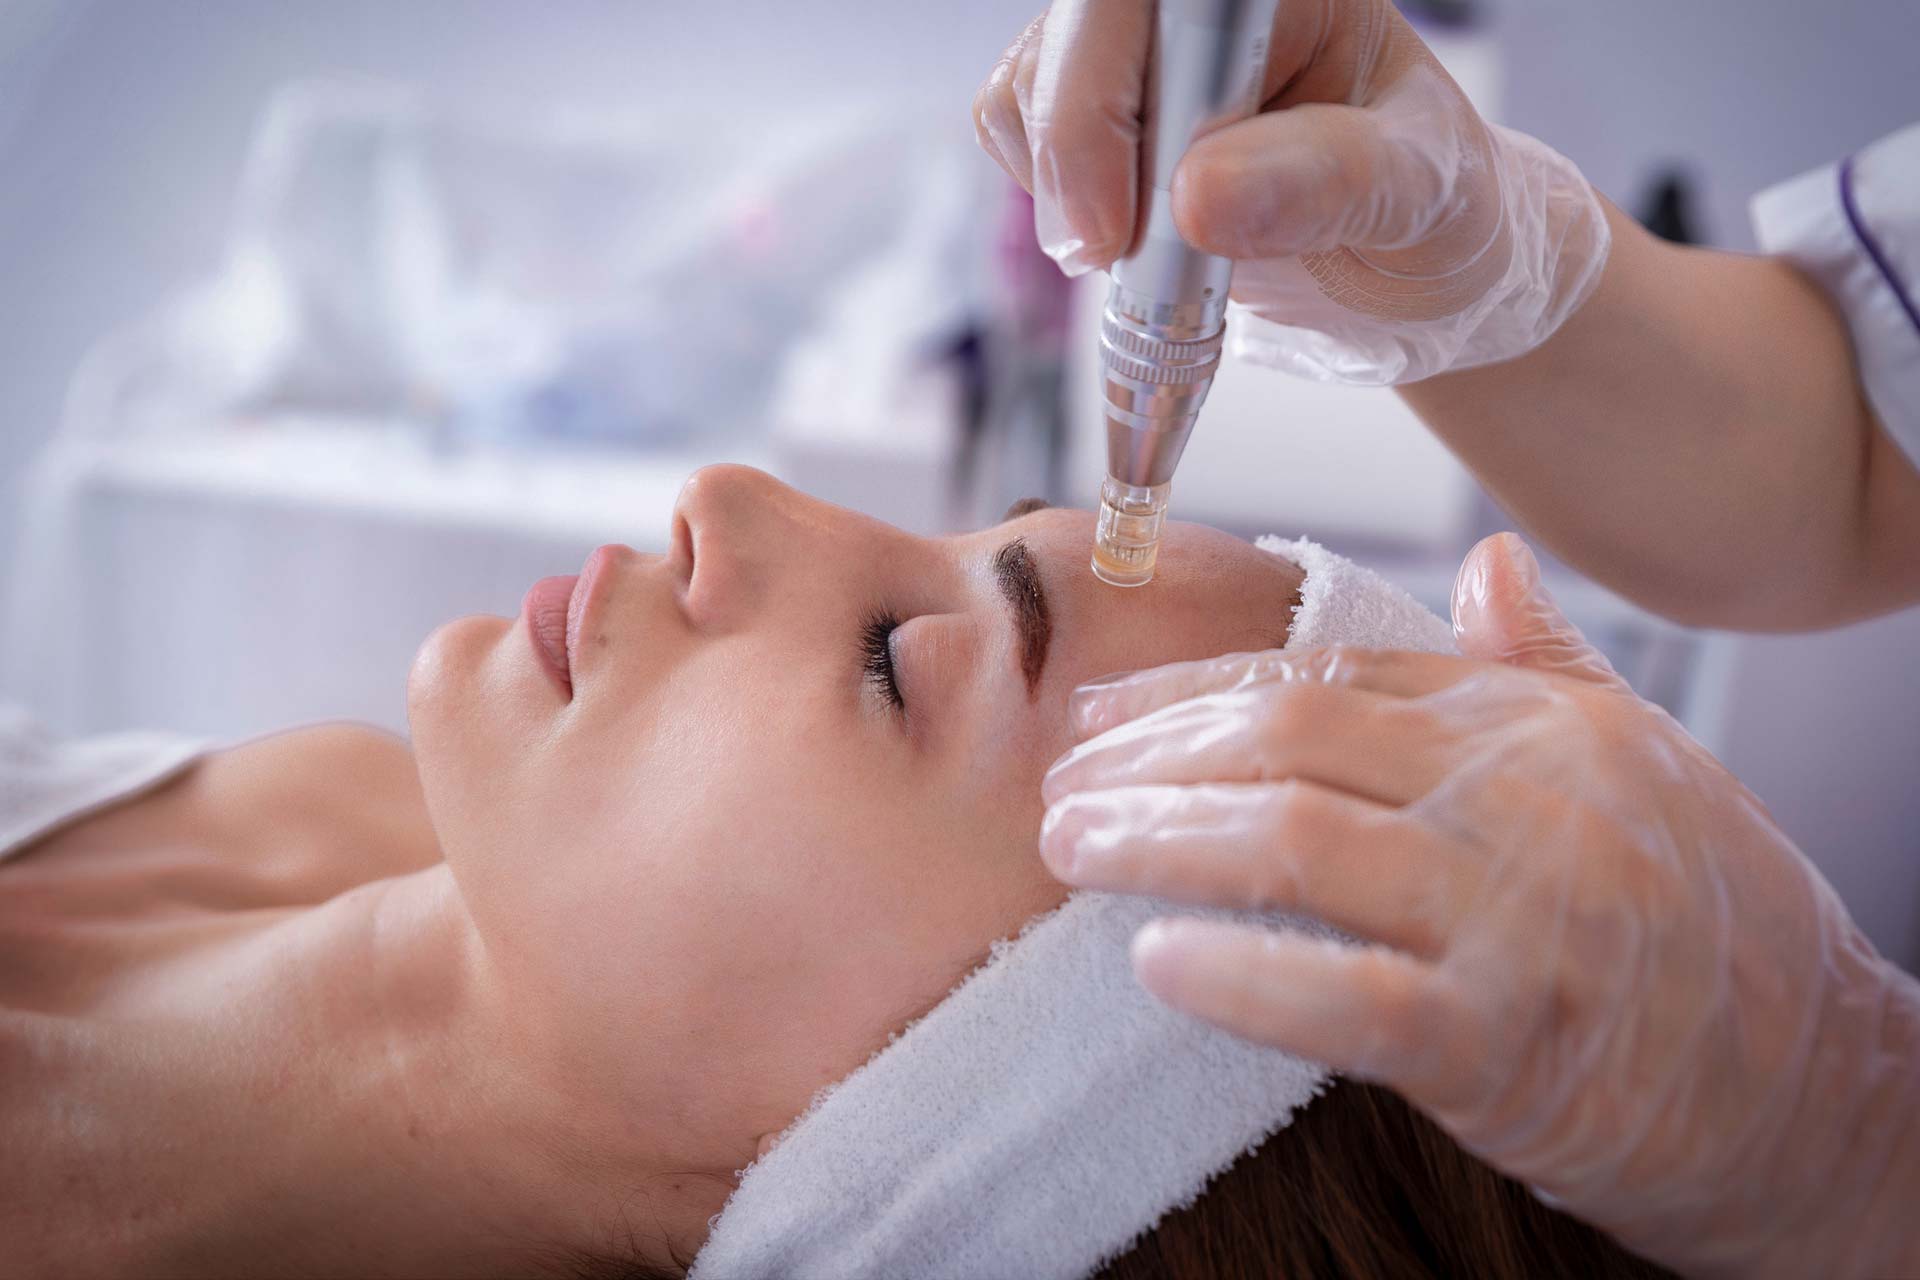 Microneedling or Laser – Which One Should You Choose?